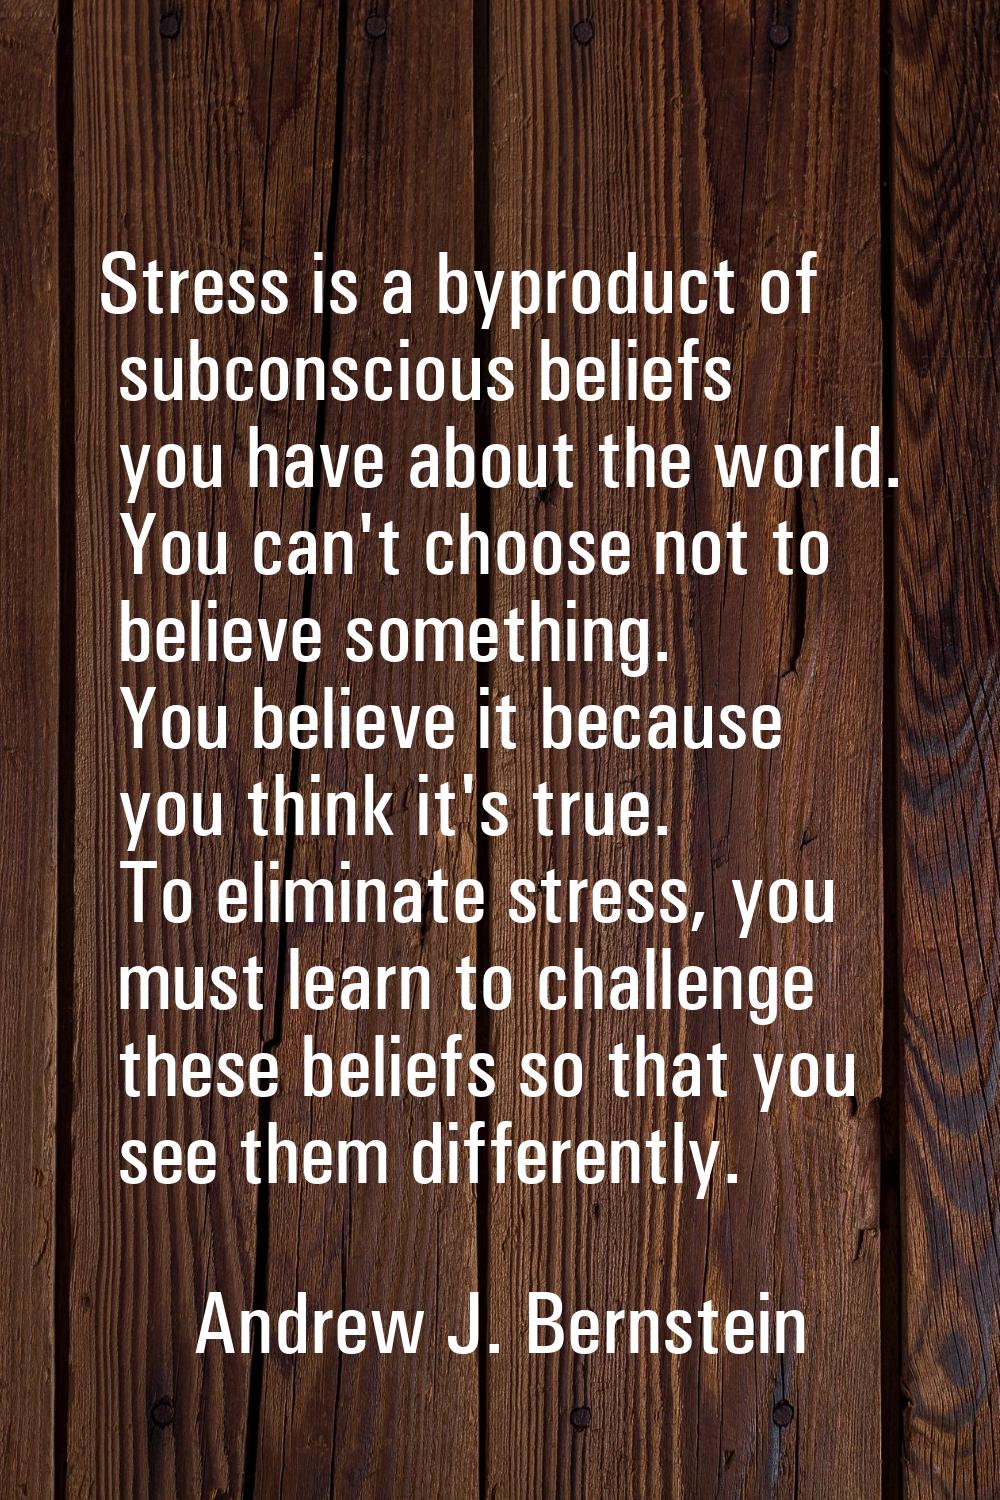 Stress is a byproduct of subconscious beliefs you have about the world. You can't choose not to bel